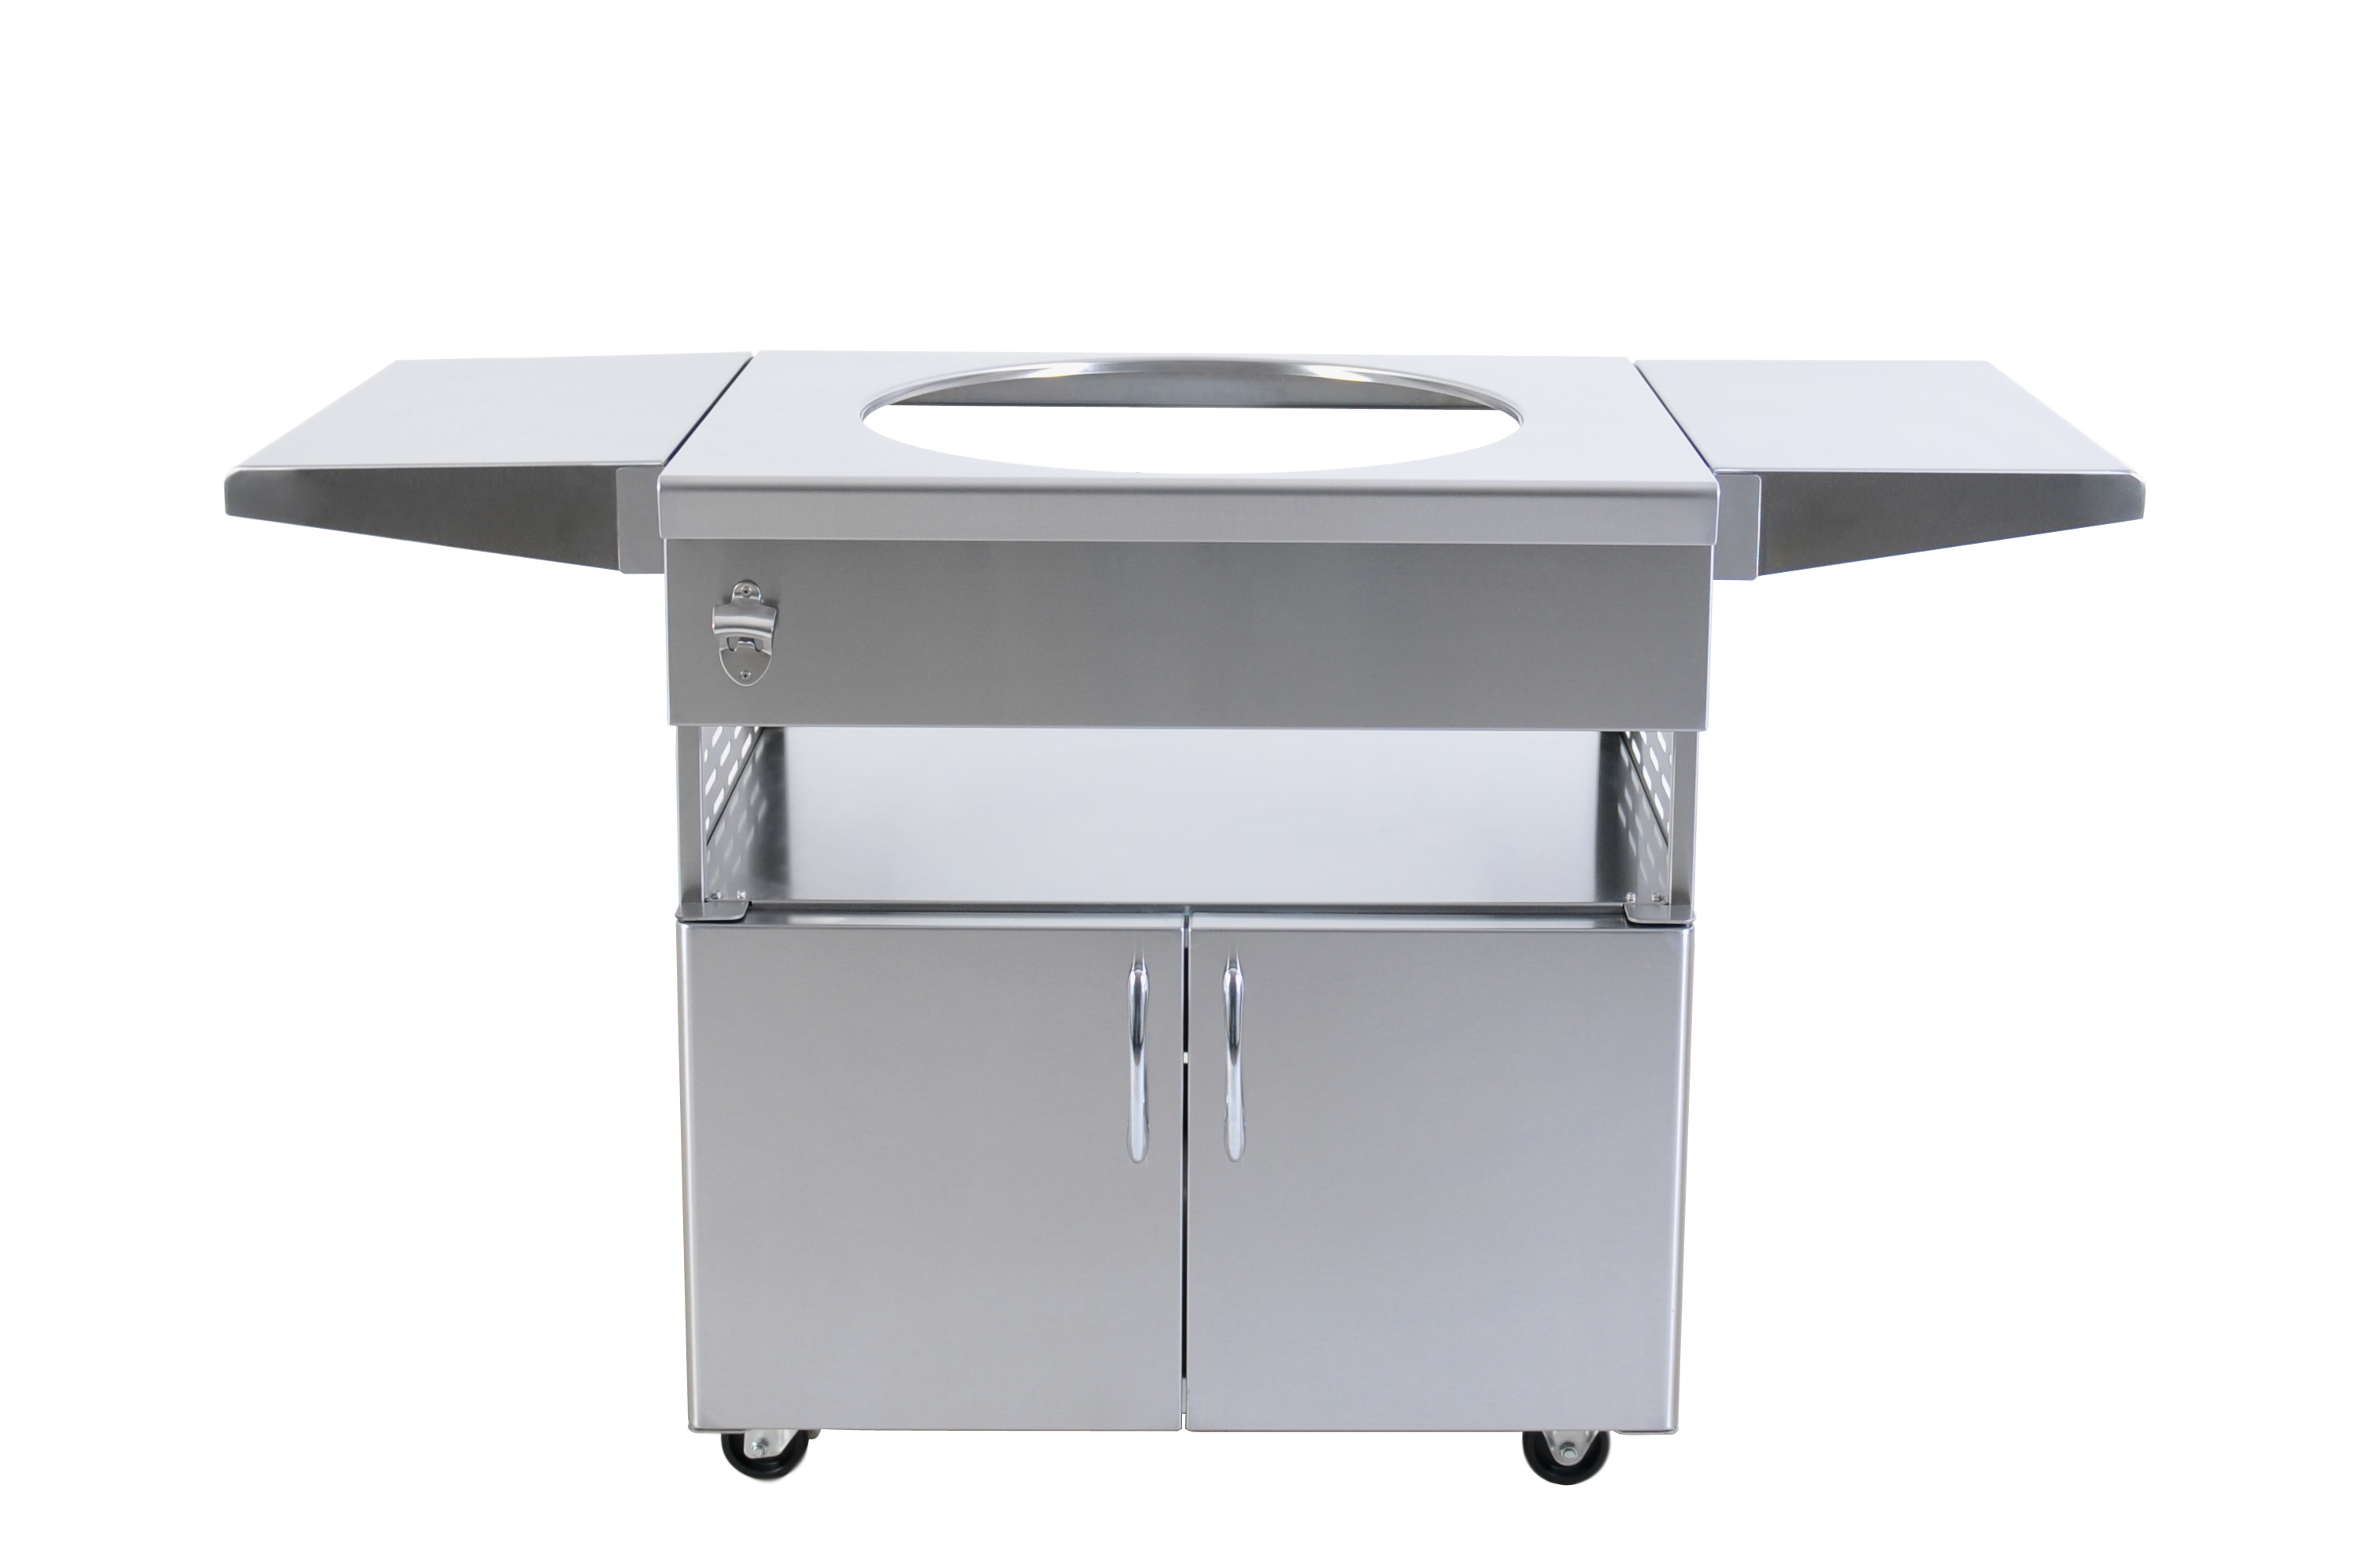 Luxury barbecue stainless steel benches